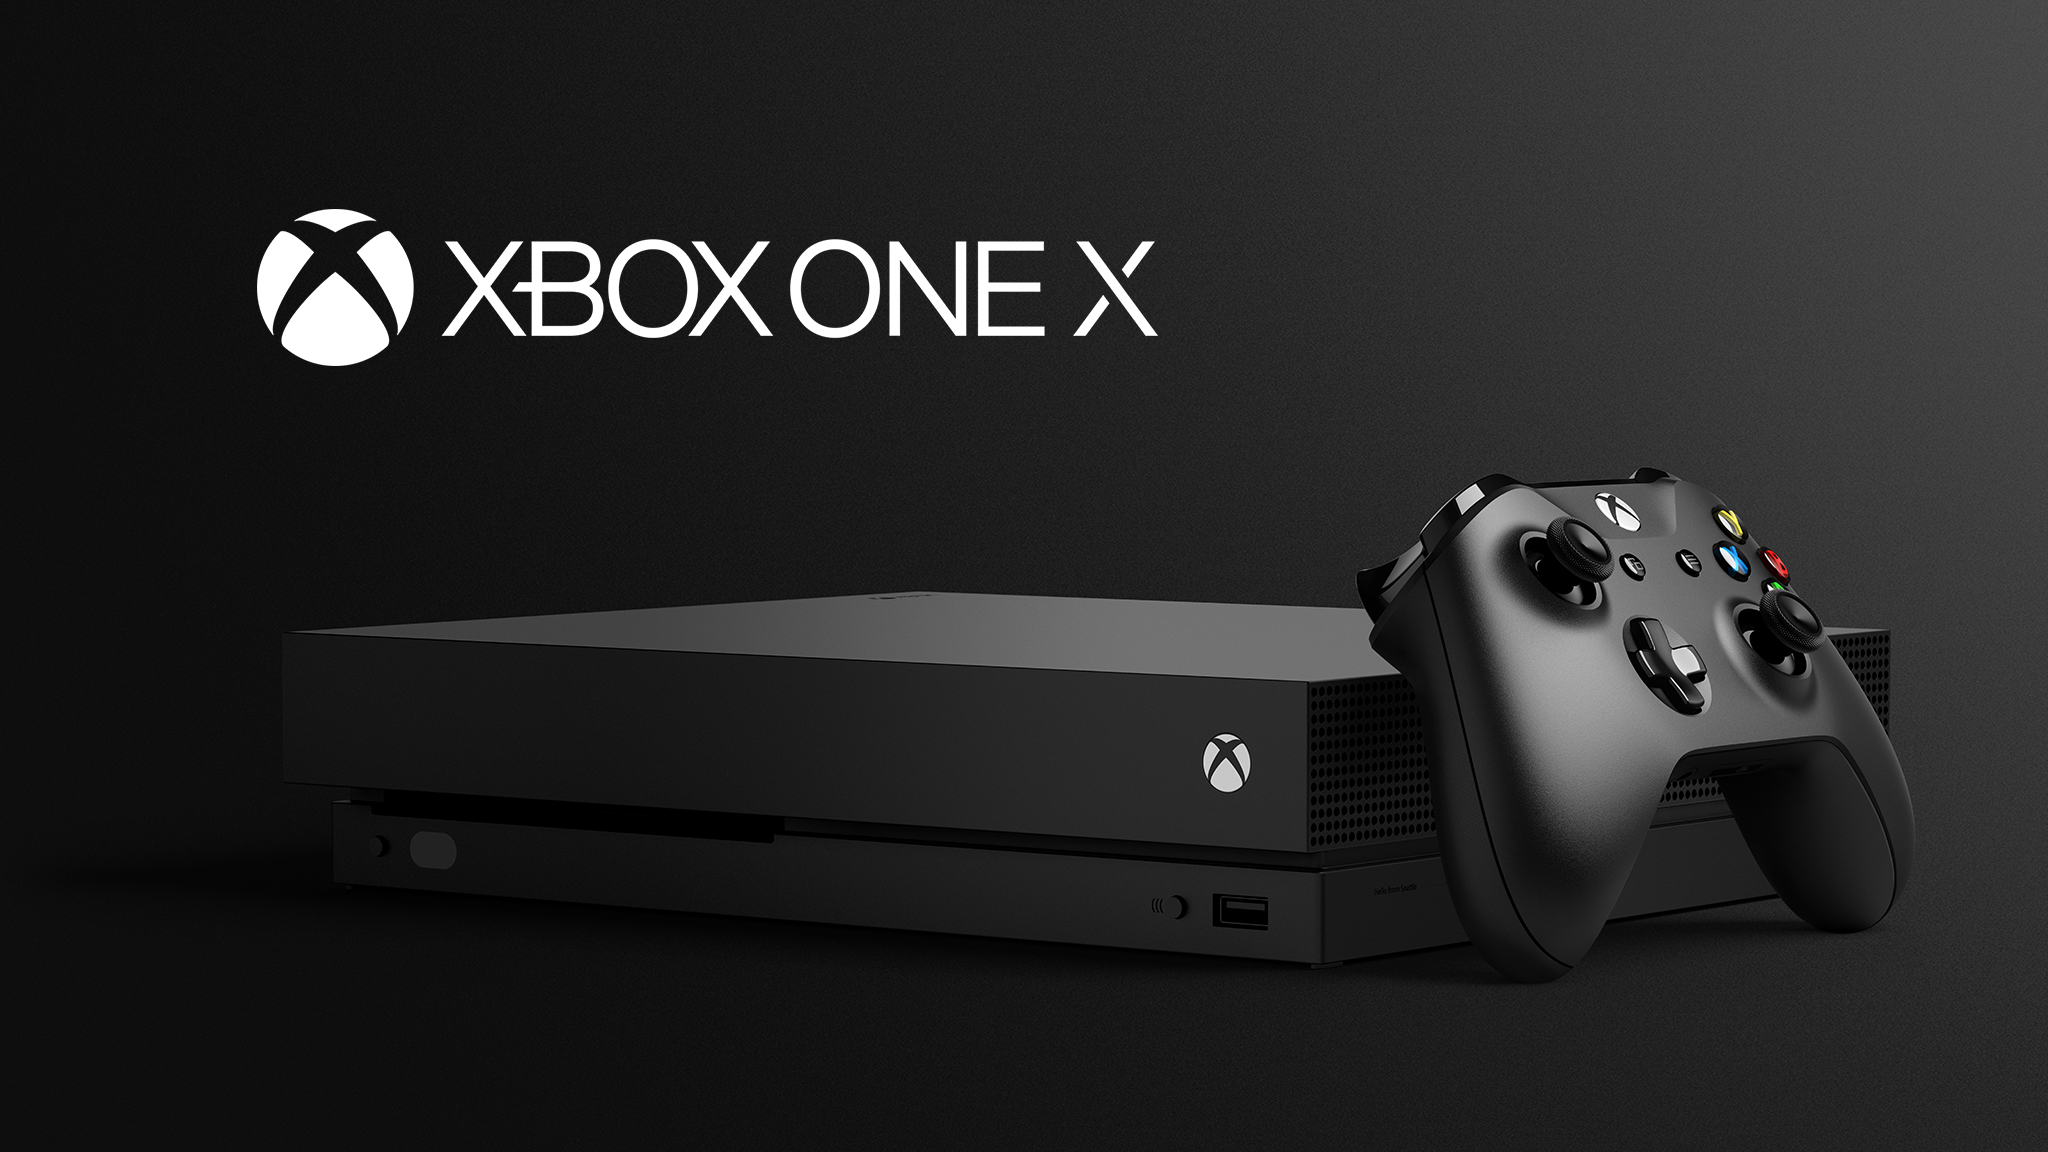 World's most powerful console, Xbox One X, launches worldwide